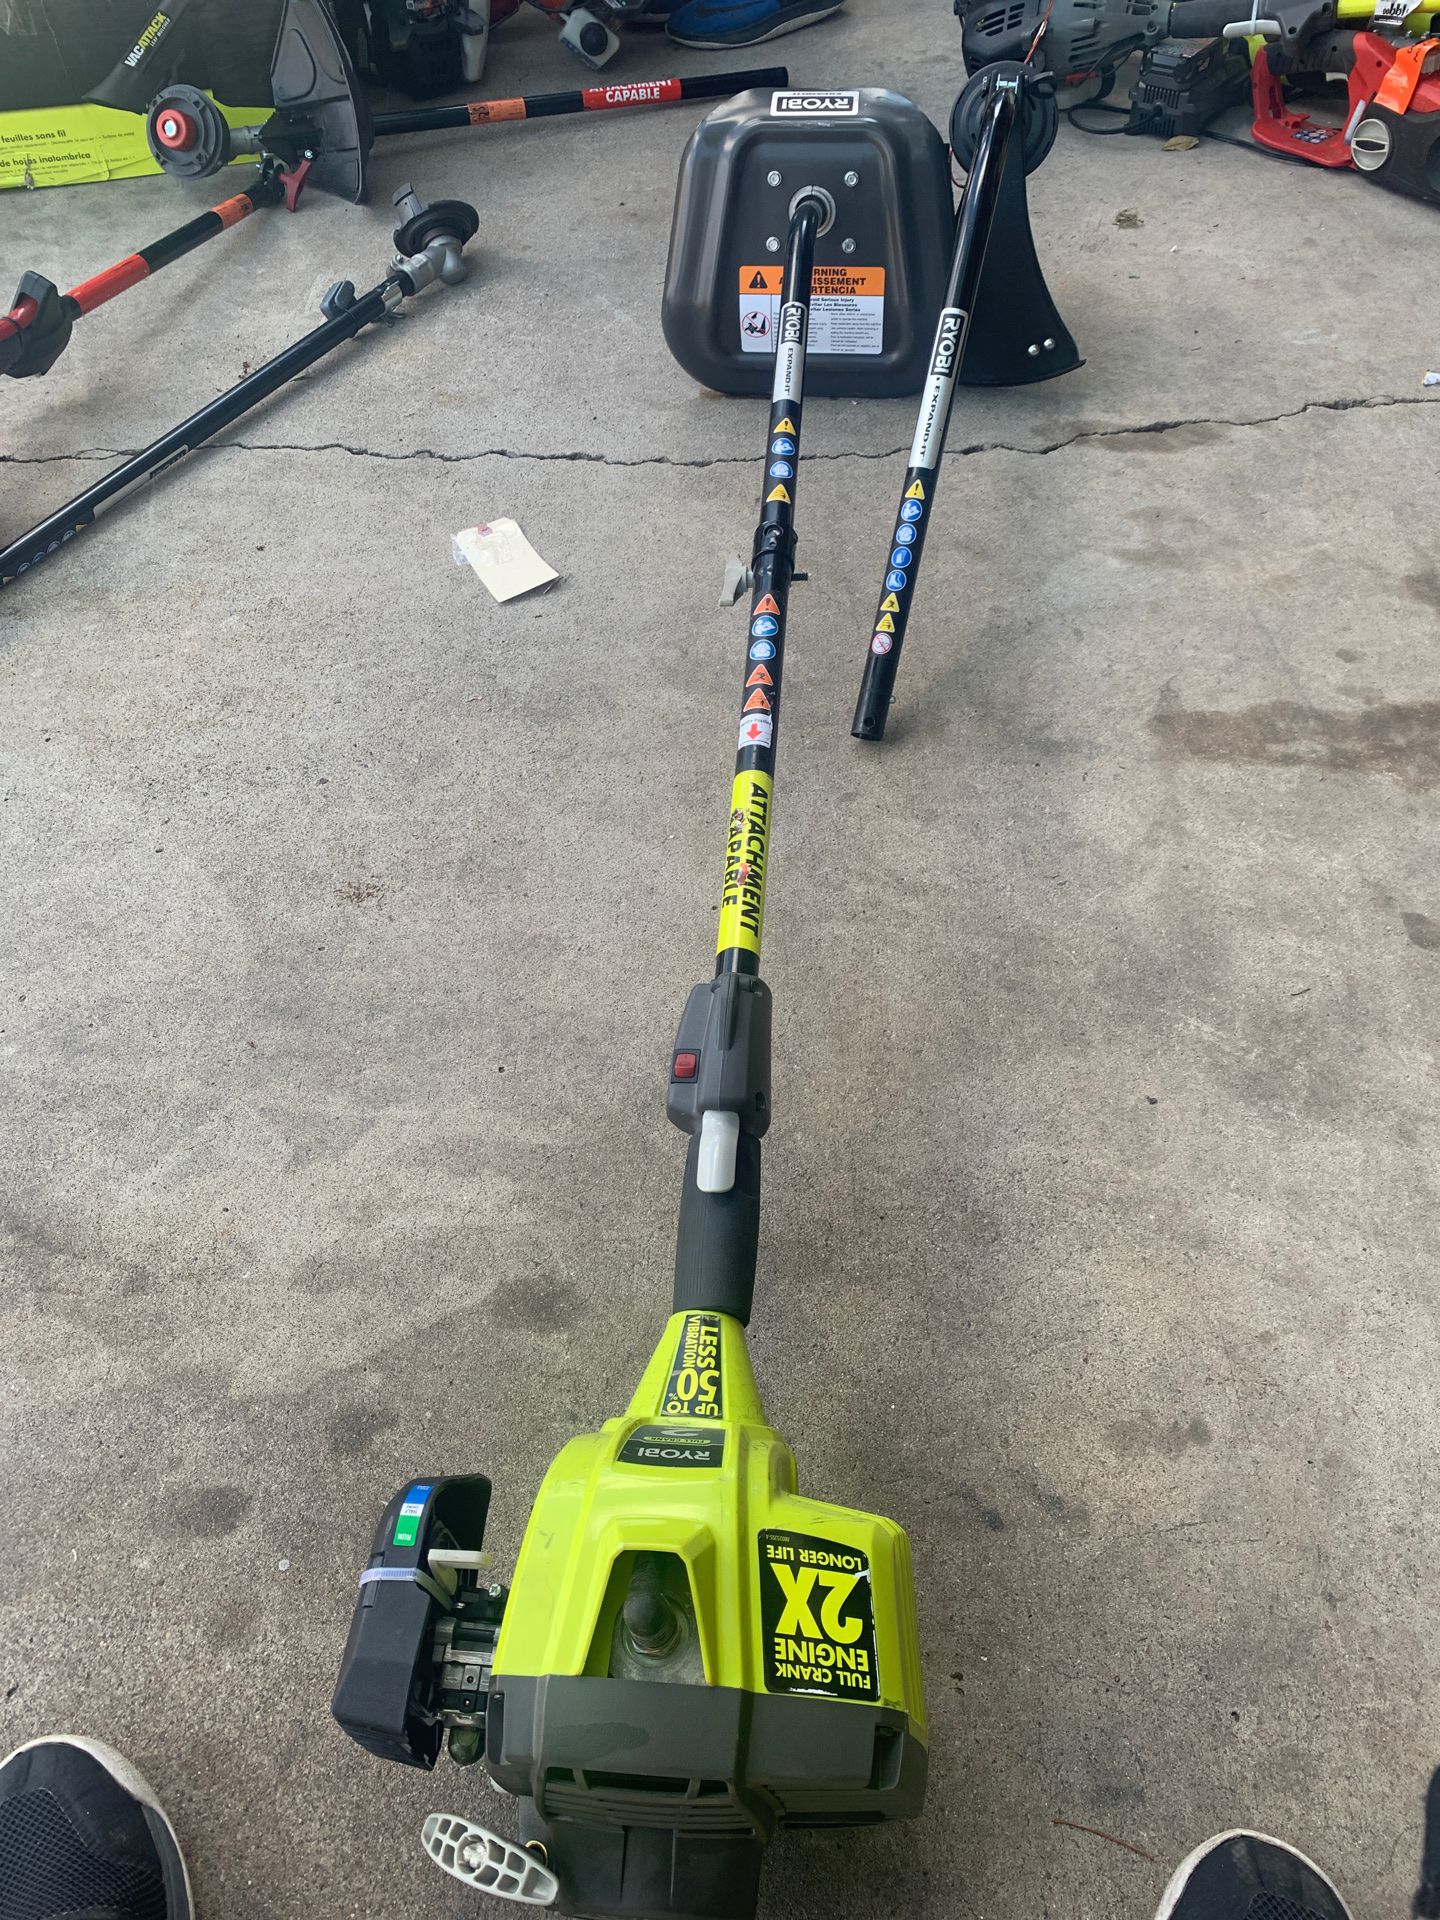 Ryobi 2 cycle weed eater/cultivator